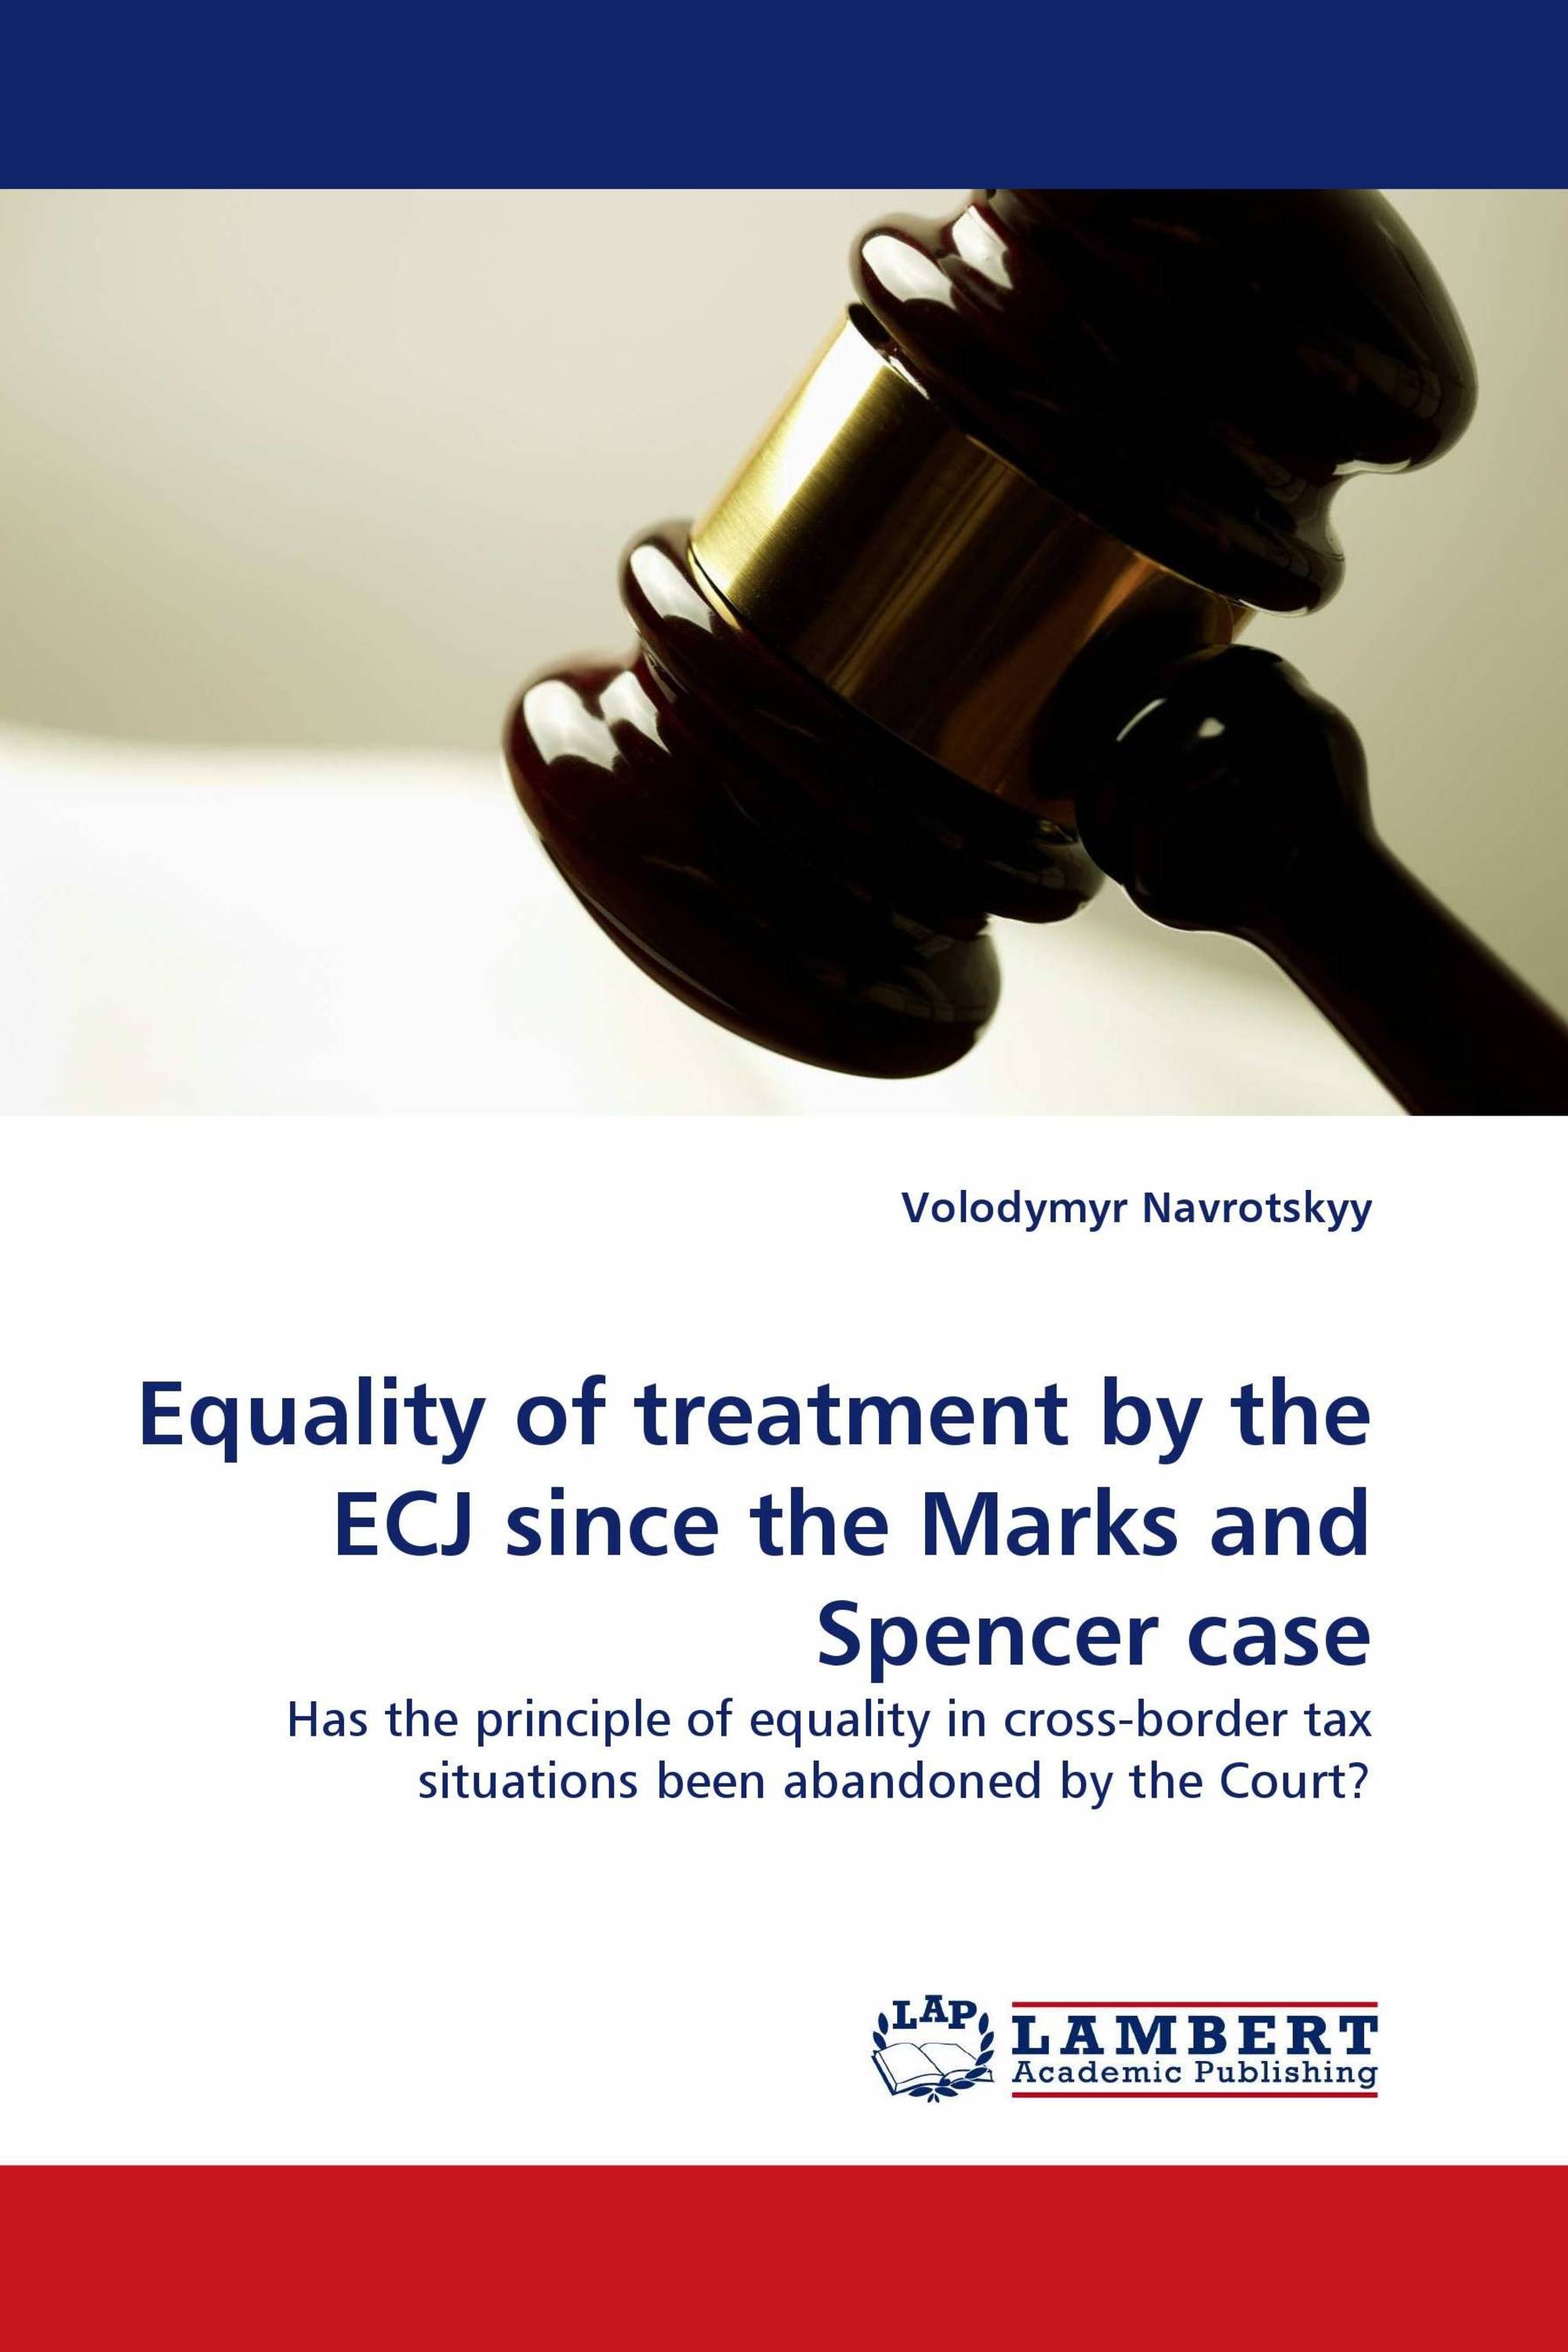 Equality of treatment by the ECJ since the Marks and Spencer case